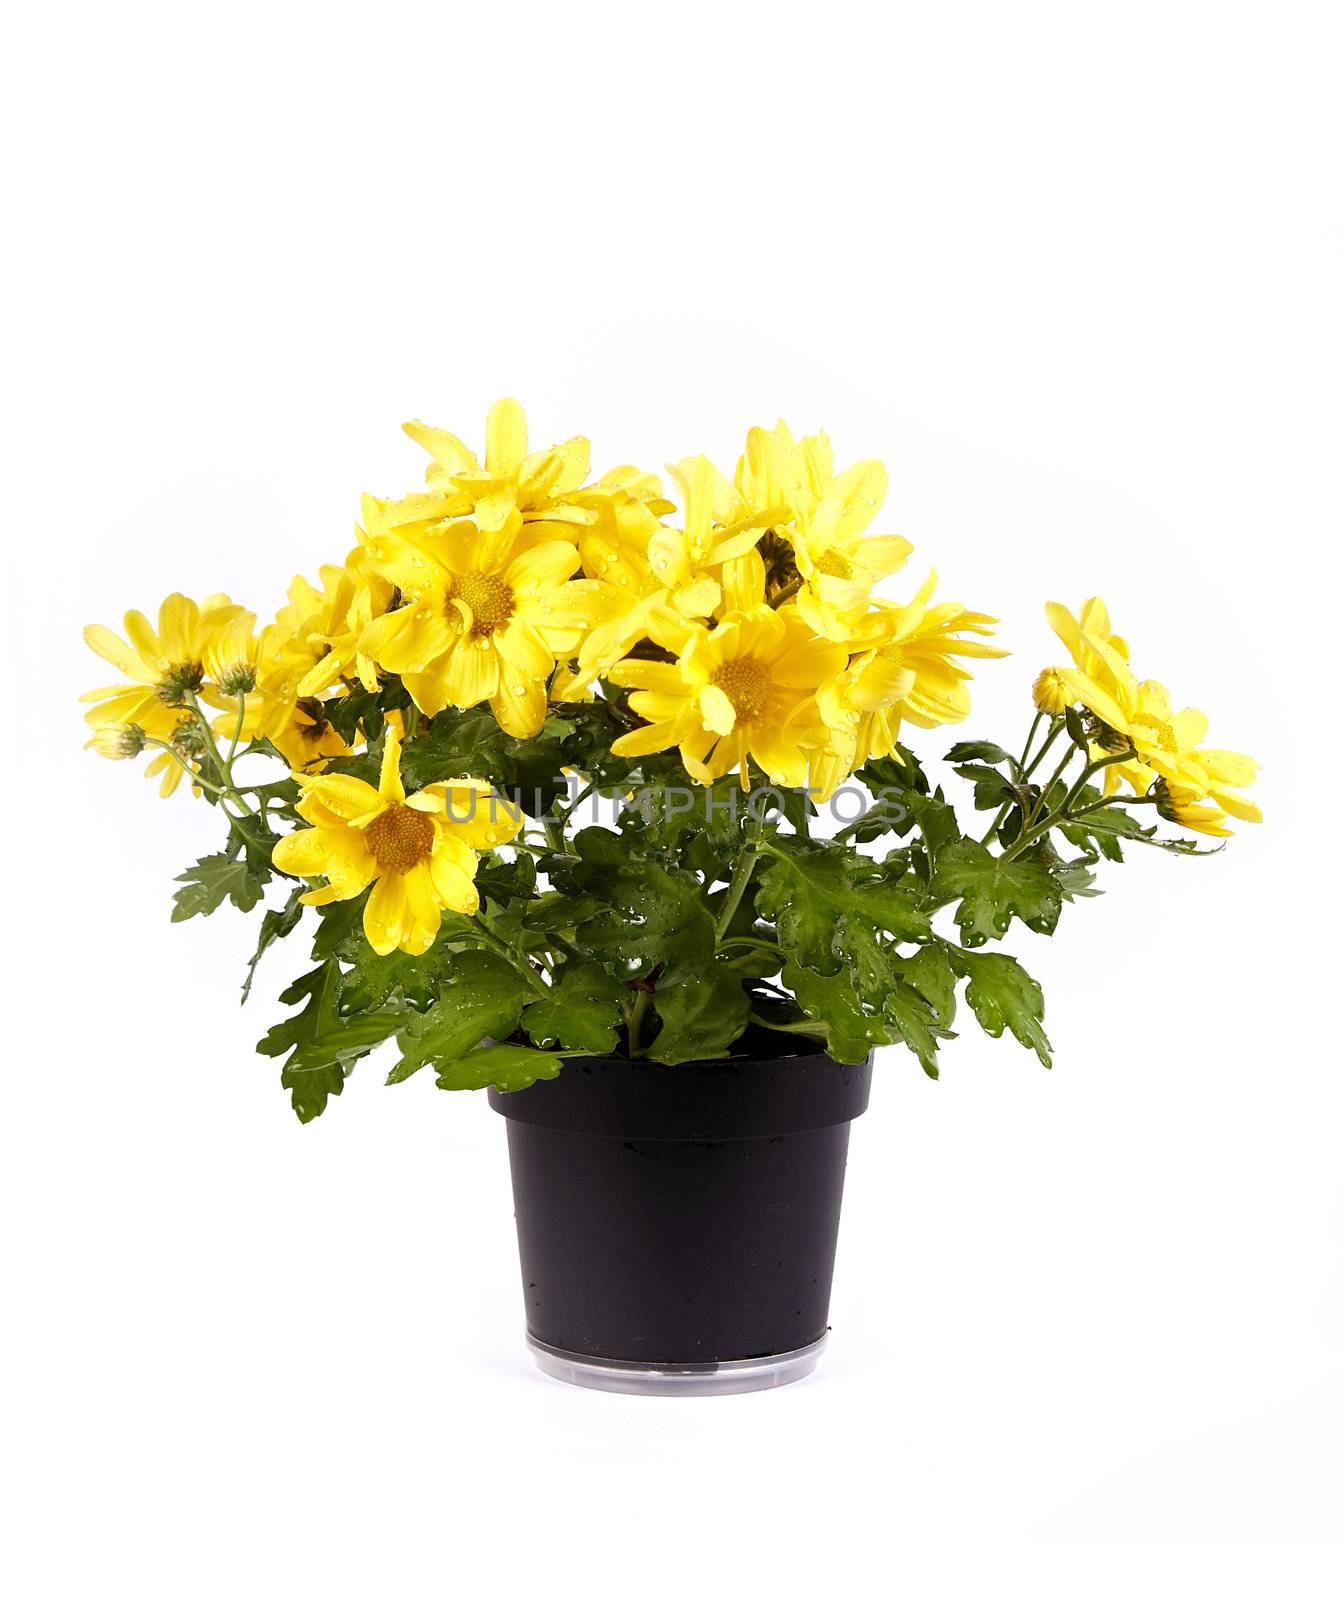 Yellow chrysanthemum in a pot on a white background